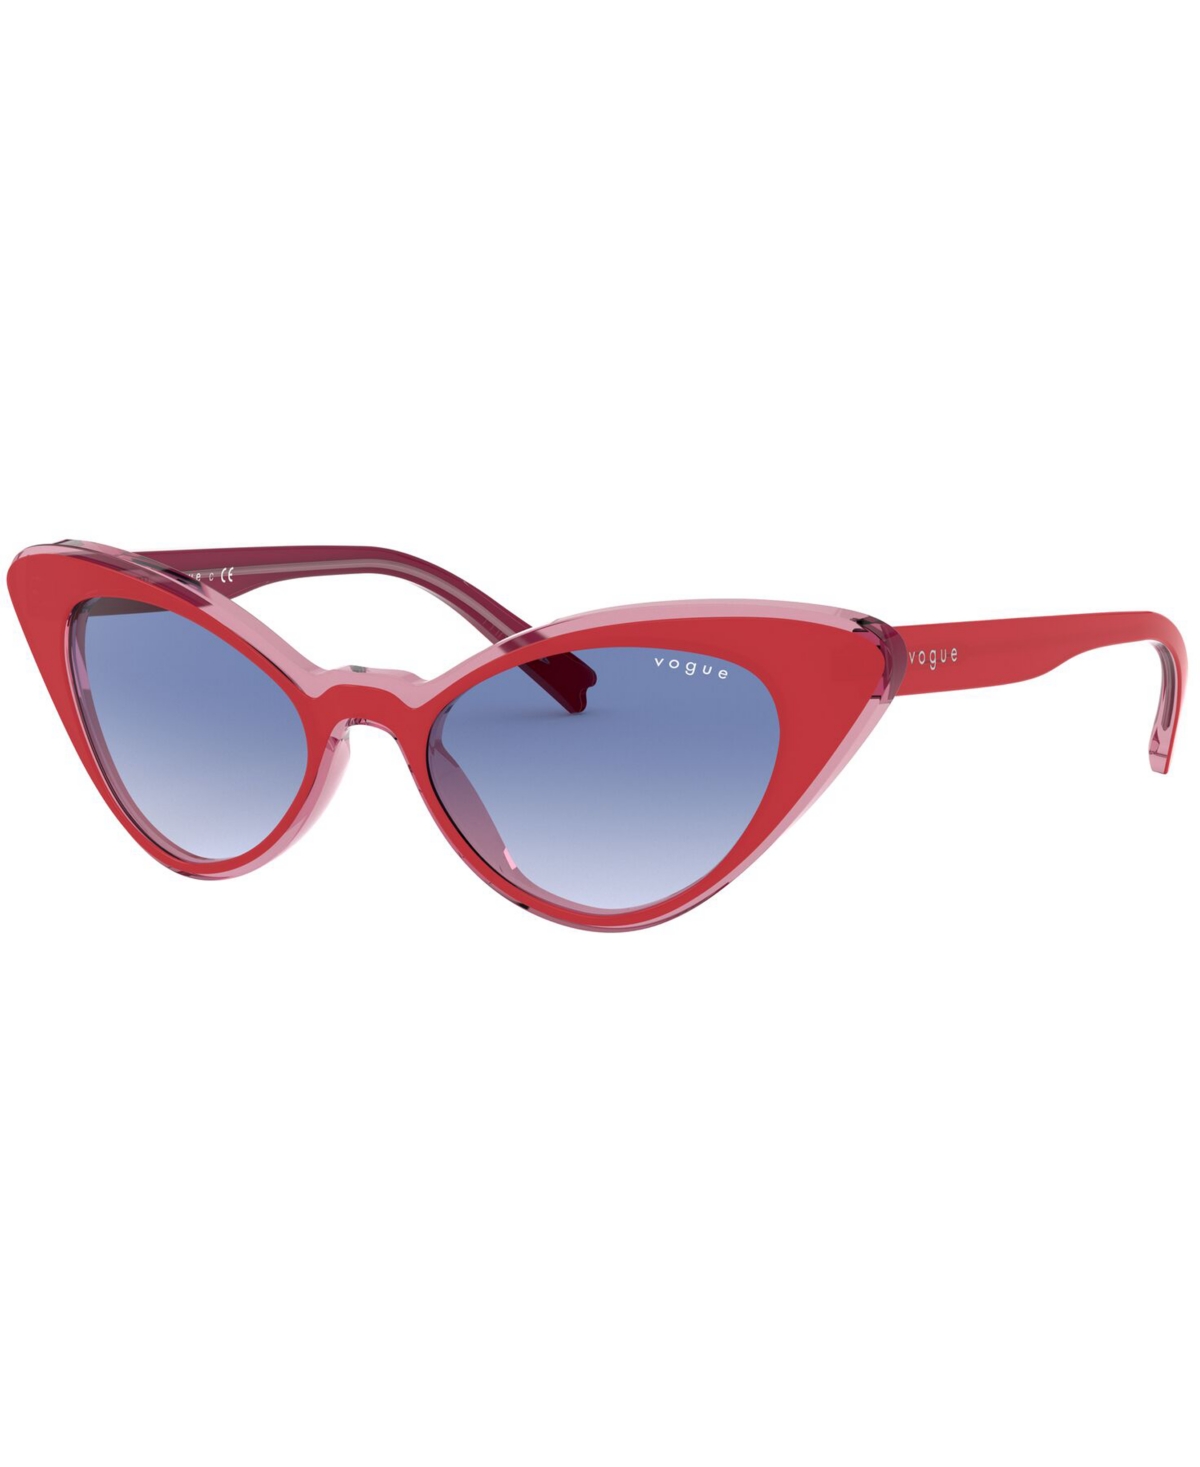 Vogue Eyewear Mbb X  Sunglasses, Vo5317s49-y In Top Red,pink Transparent,clear Gradient